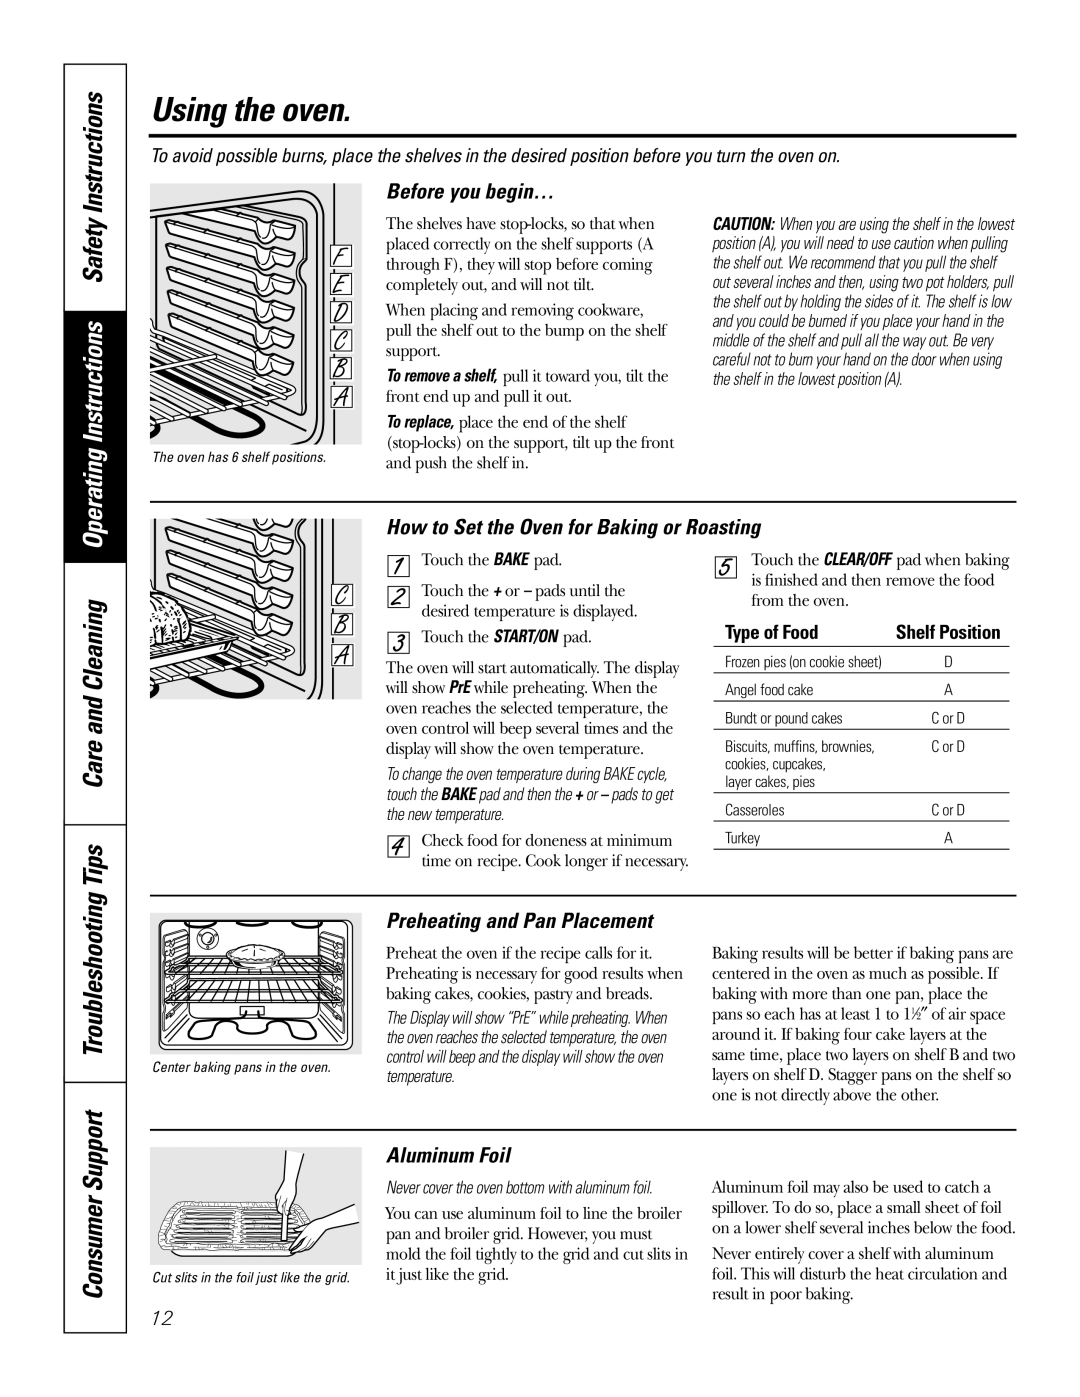 GE JBP65 Tips, Troubleshooting, Operating Instructions, Before you begin…, Preheating and Pan Placement, Aluminum Foil 